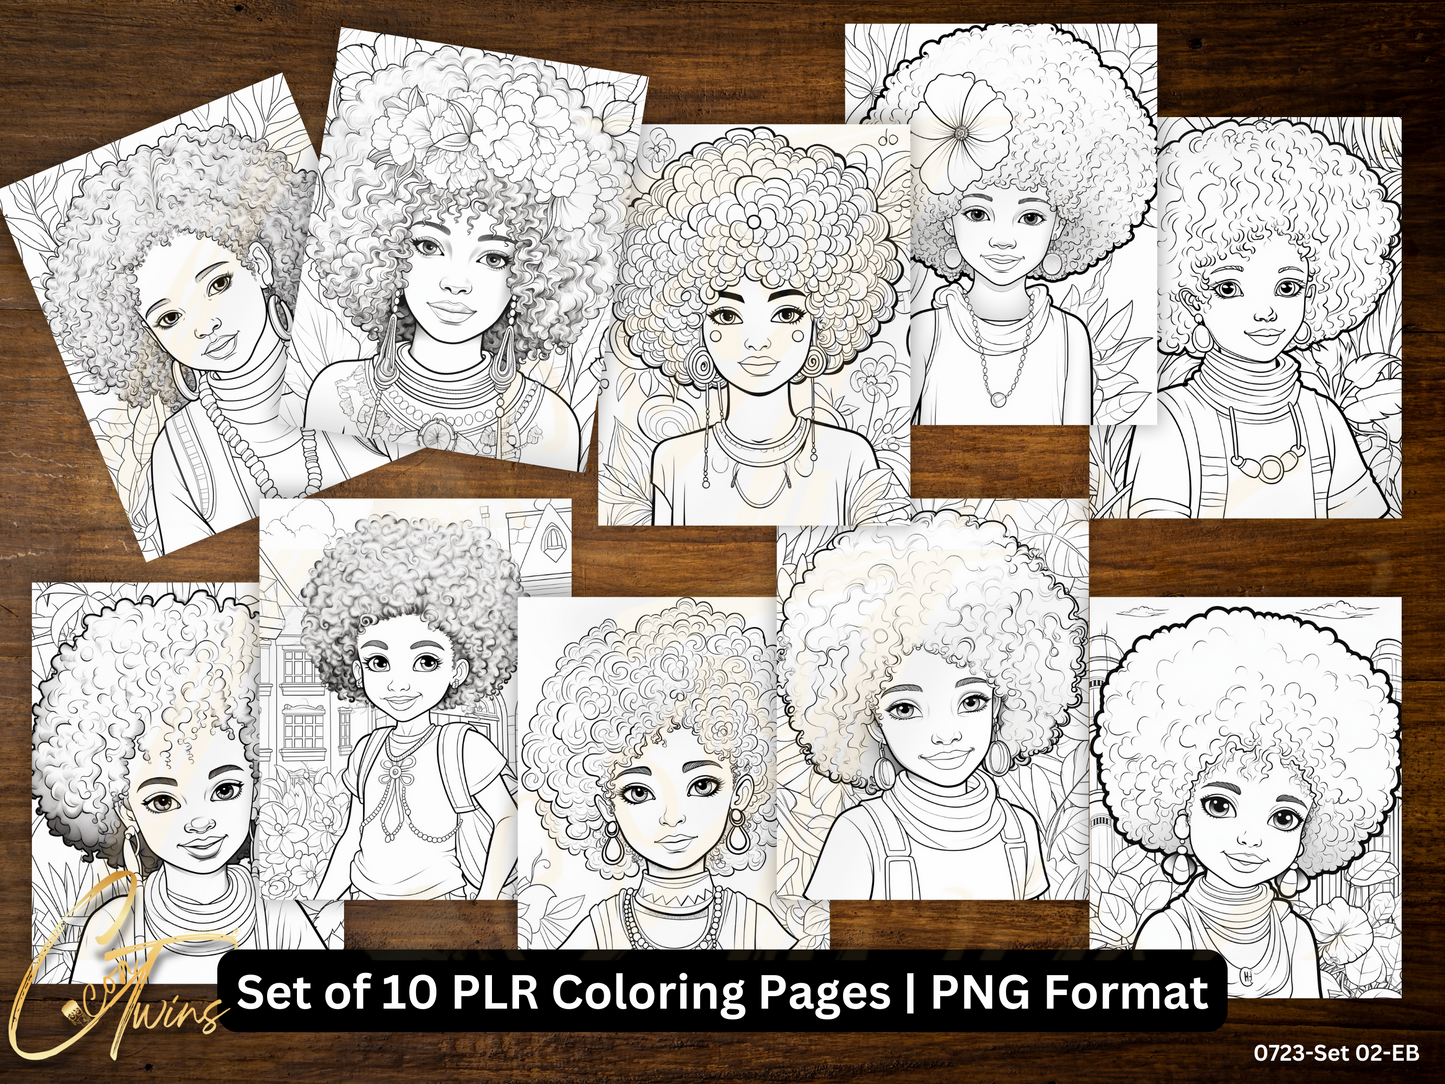 Limited Edition | PLR Coloring Pages | Set 02-EB (0723)